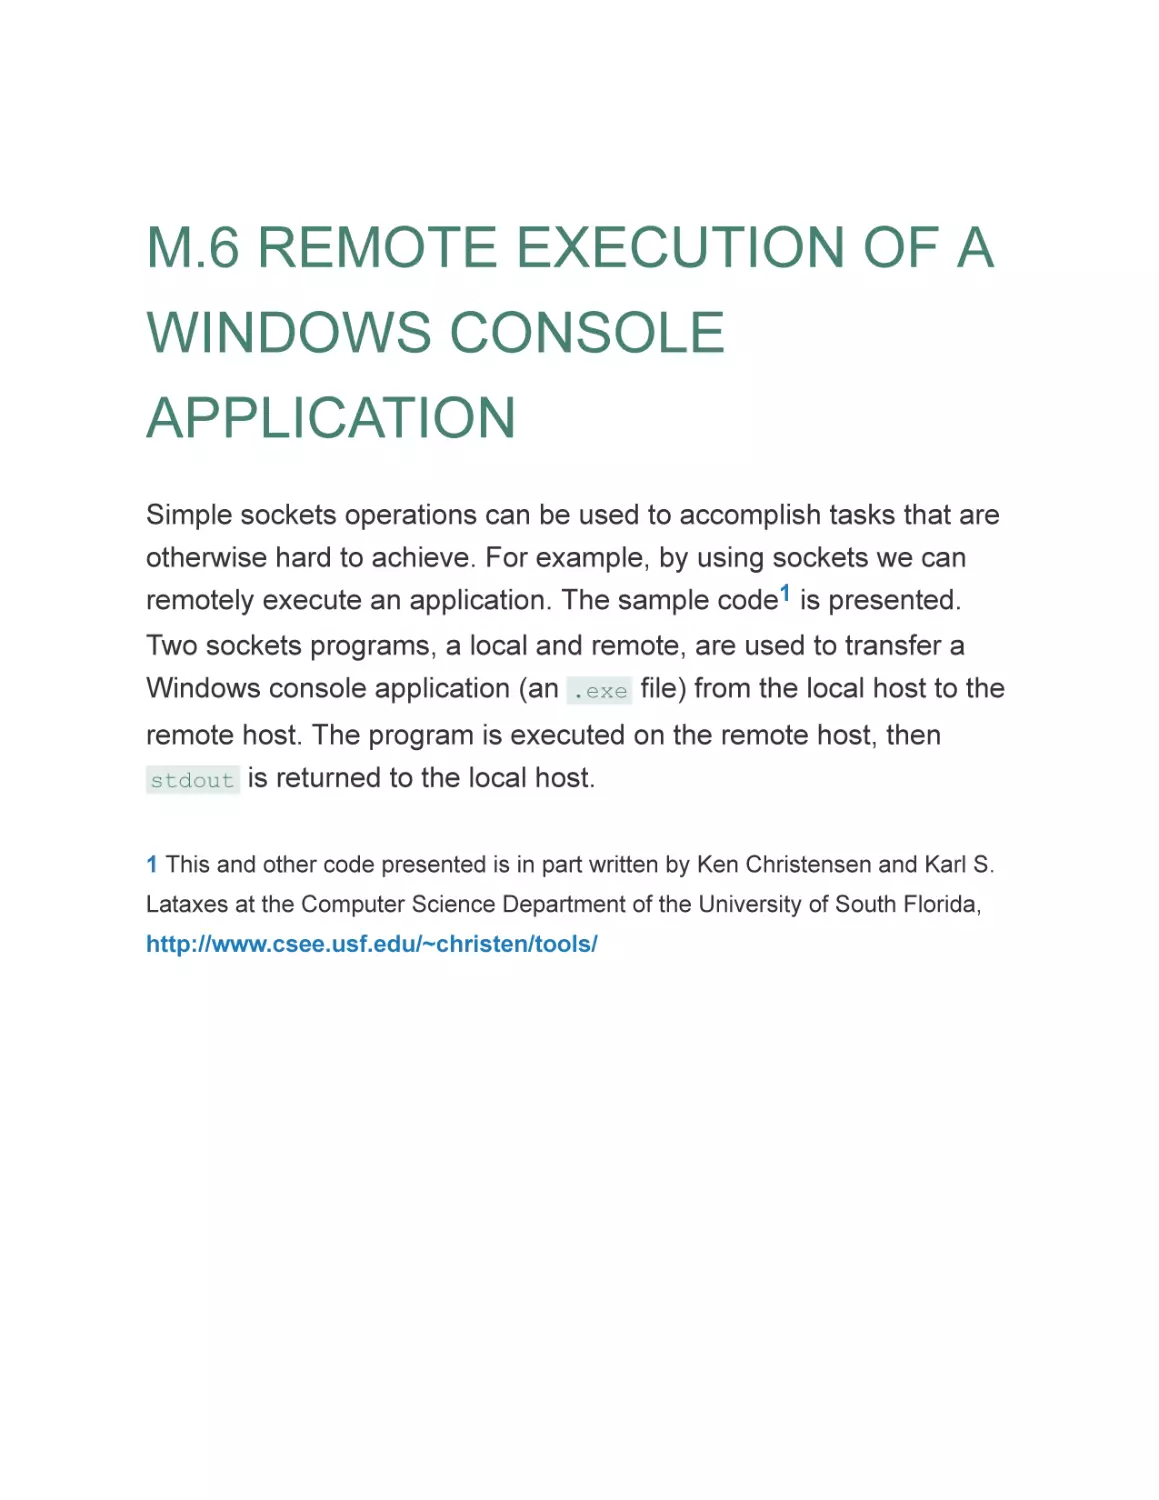 M.6 REMOTE EXECUTION OF A WINDOWS CONSOLE APPLICATION